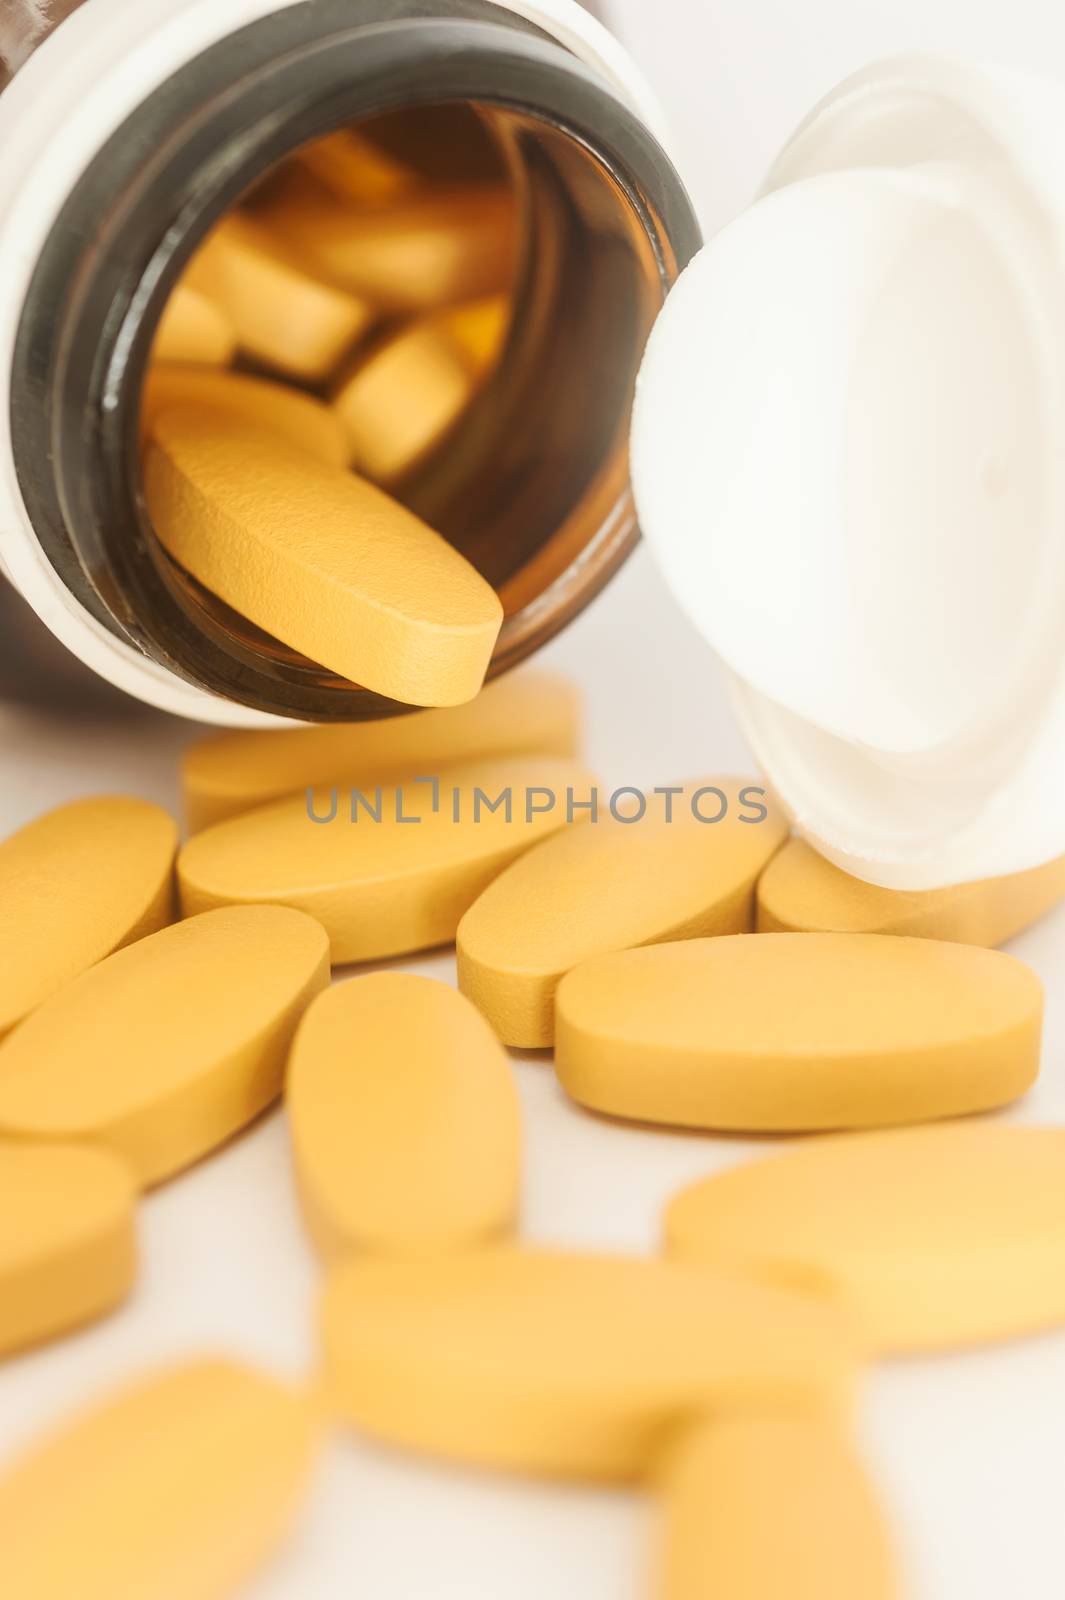 Vitamin in capsule spilling out of a bottle, Vitamin for health